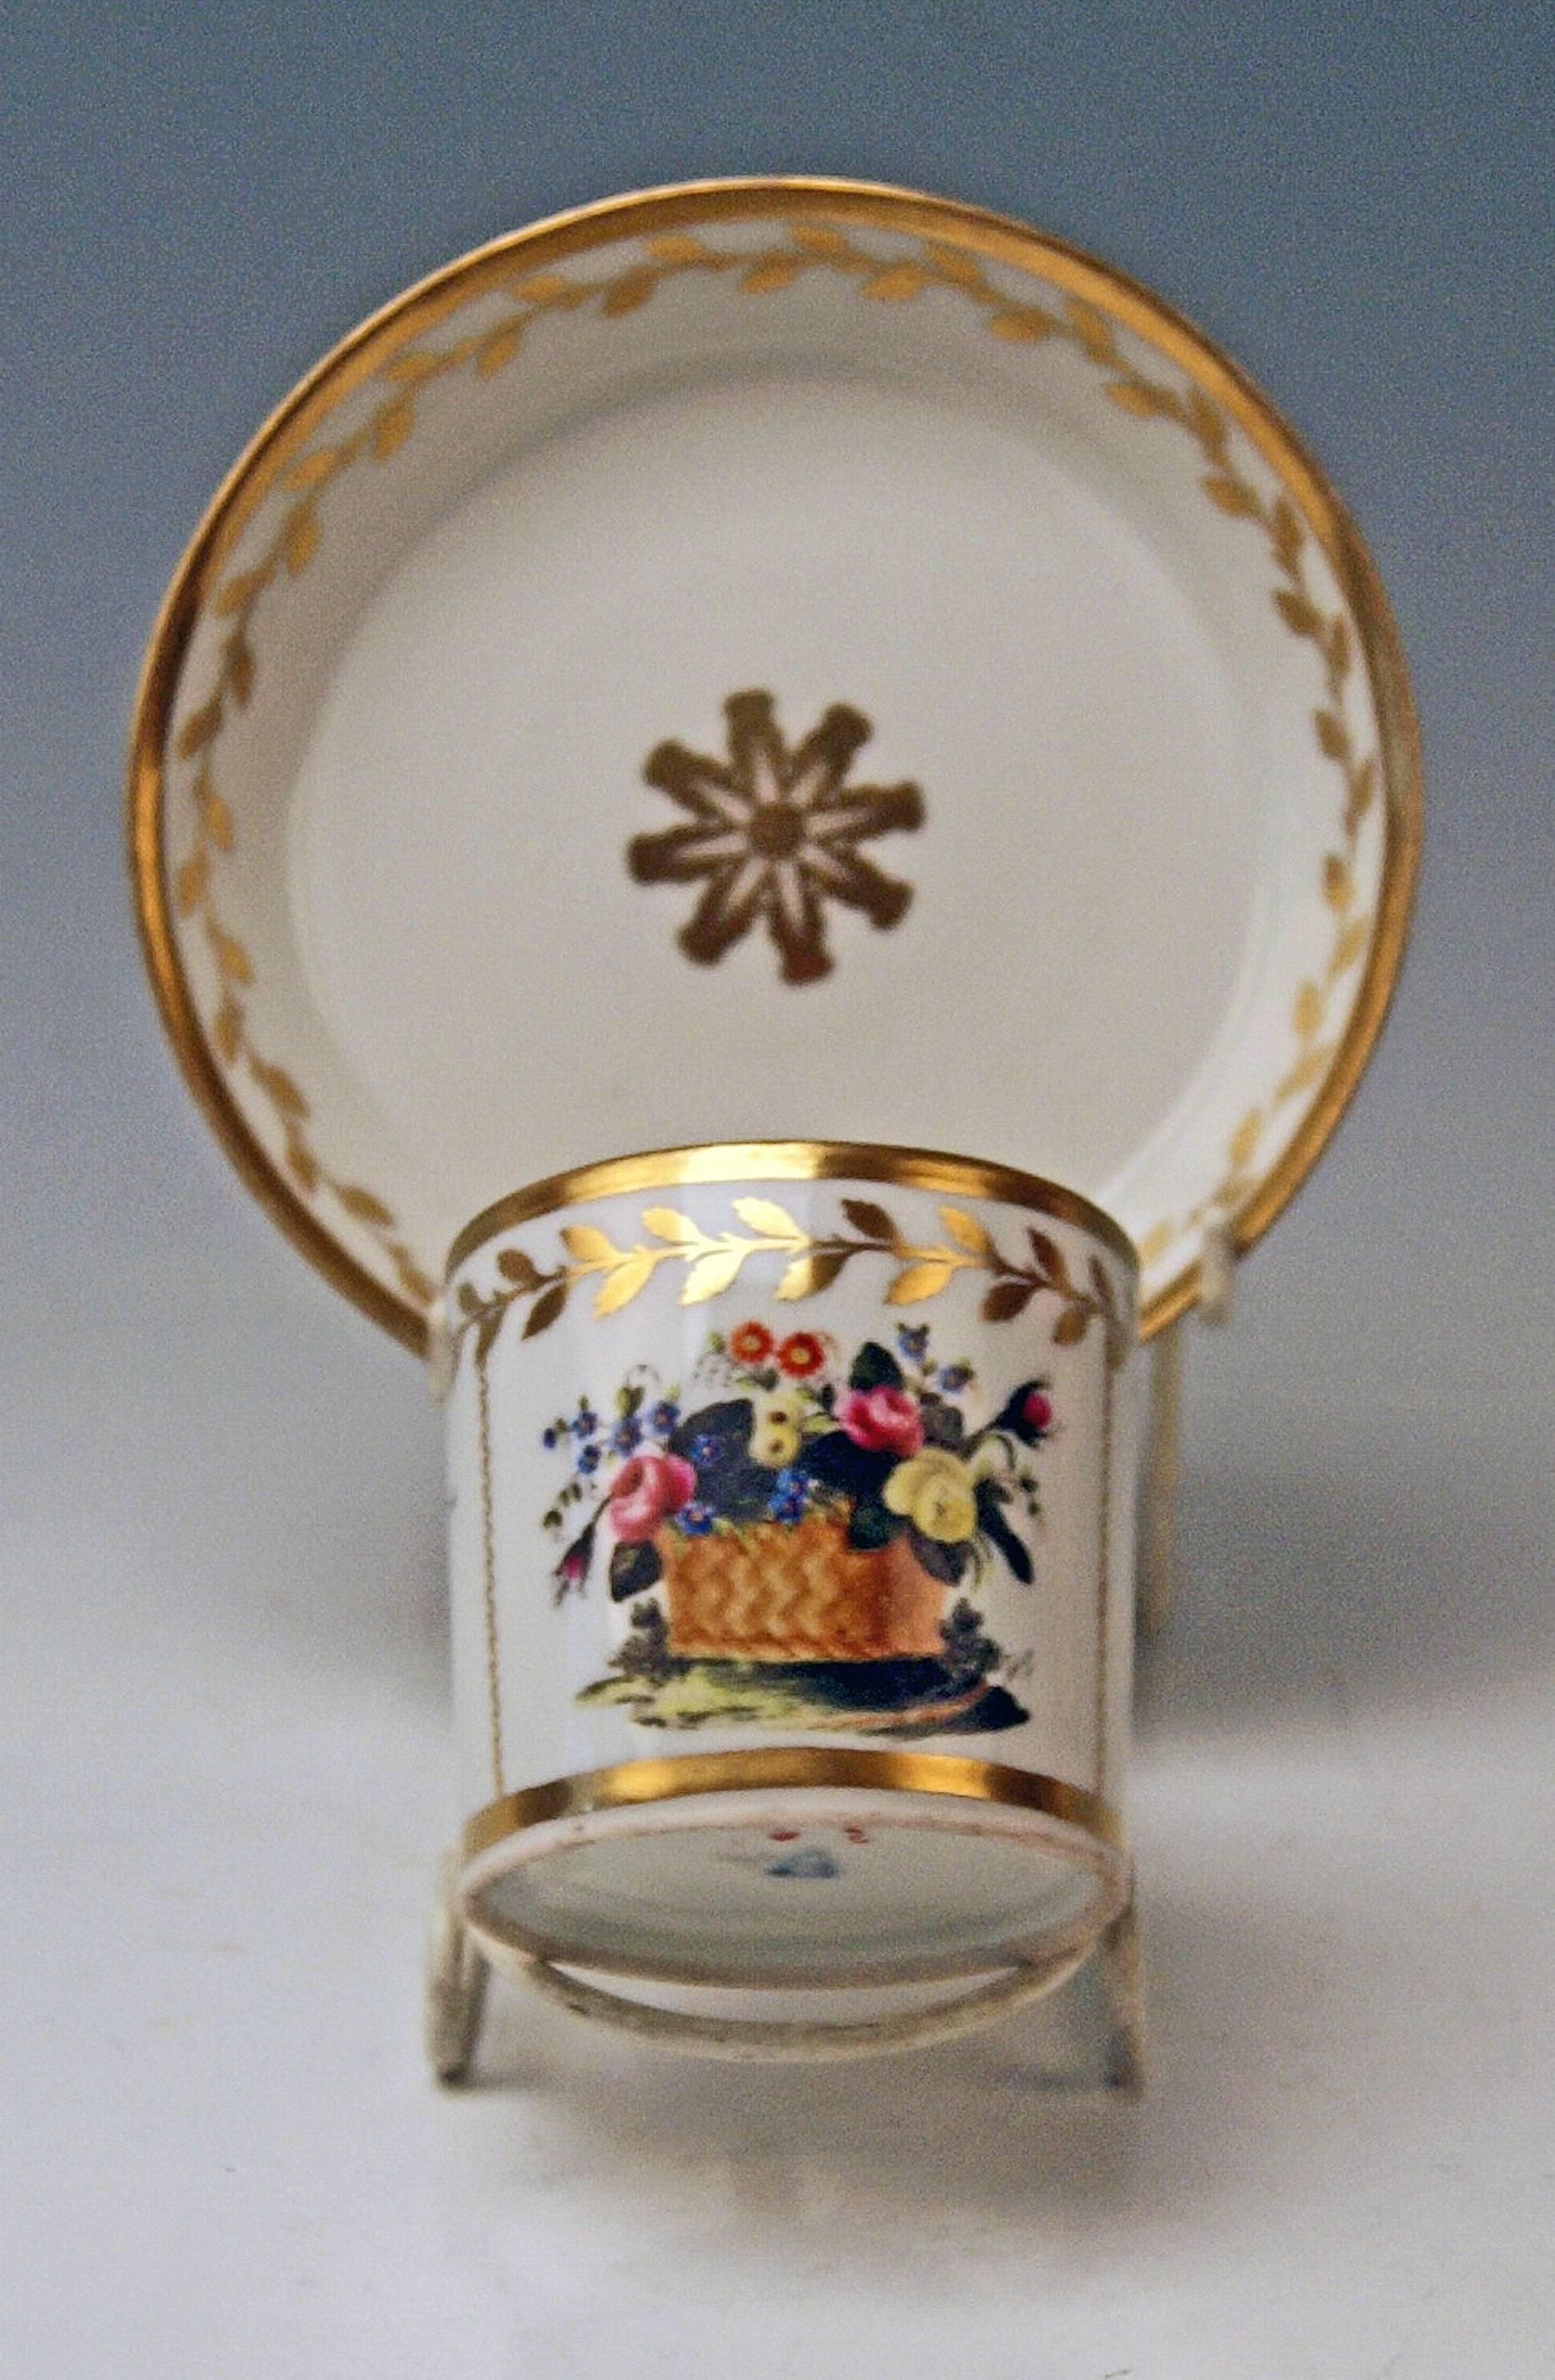 Cylindric cup with angular handle and saucer, both decorated with golden ornaments.

Vienna/ Old Imperial Austrian Porcelain Manufactory
(= Alt Wien / Kaiserliche Porzellan Manufaktur)
dated 1816

Hallmarked:
FORMER's NUMBER 40

VIENNESE